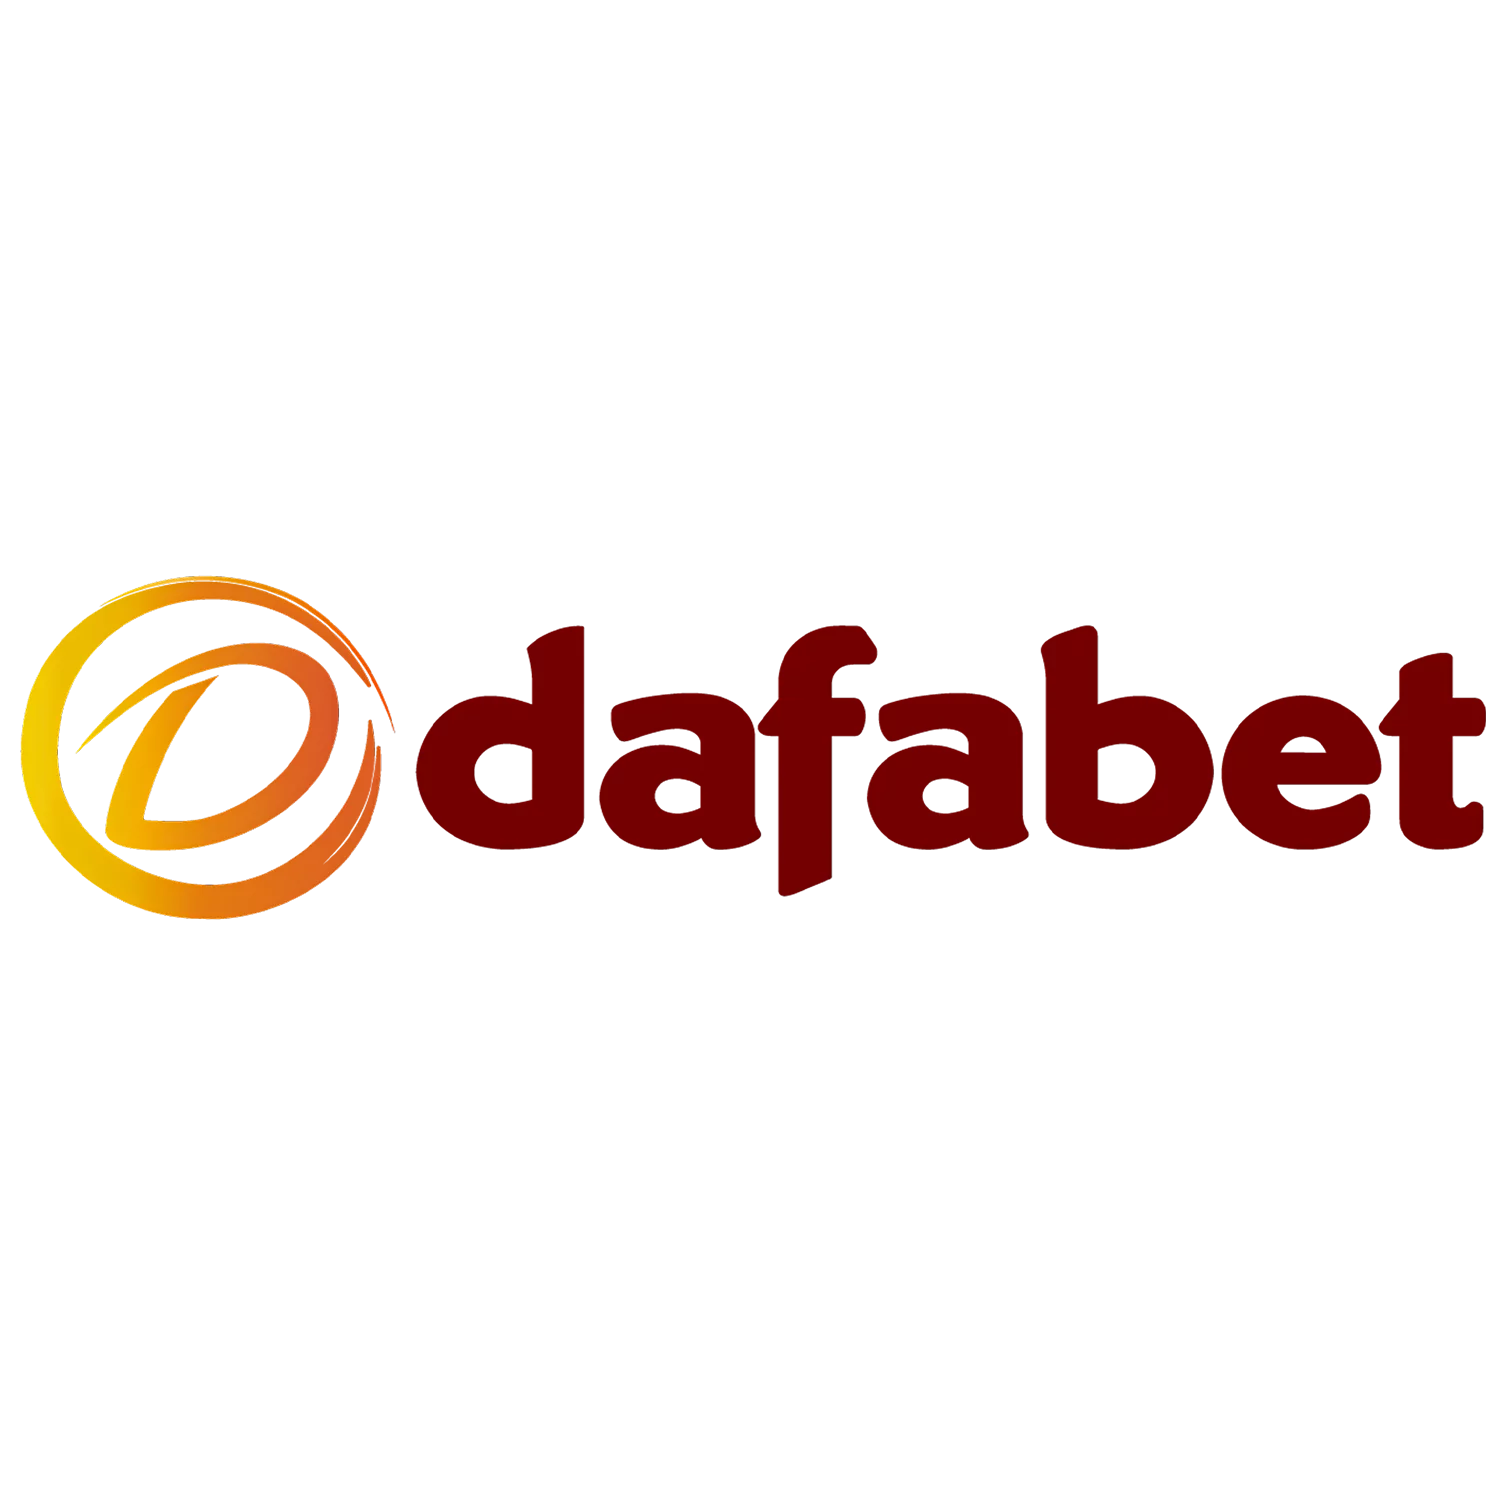 Dafabet rather convenient online betting platform for Indian pleyers to bet on cricket.